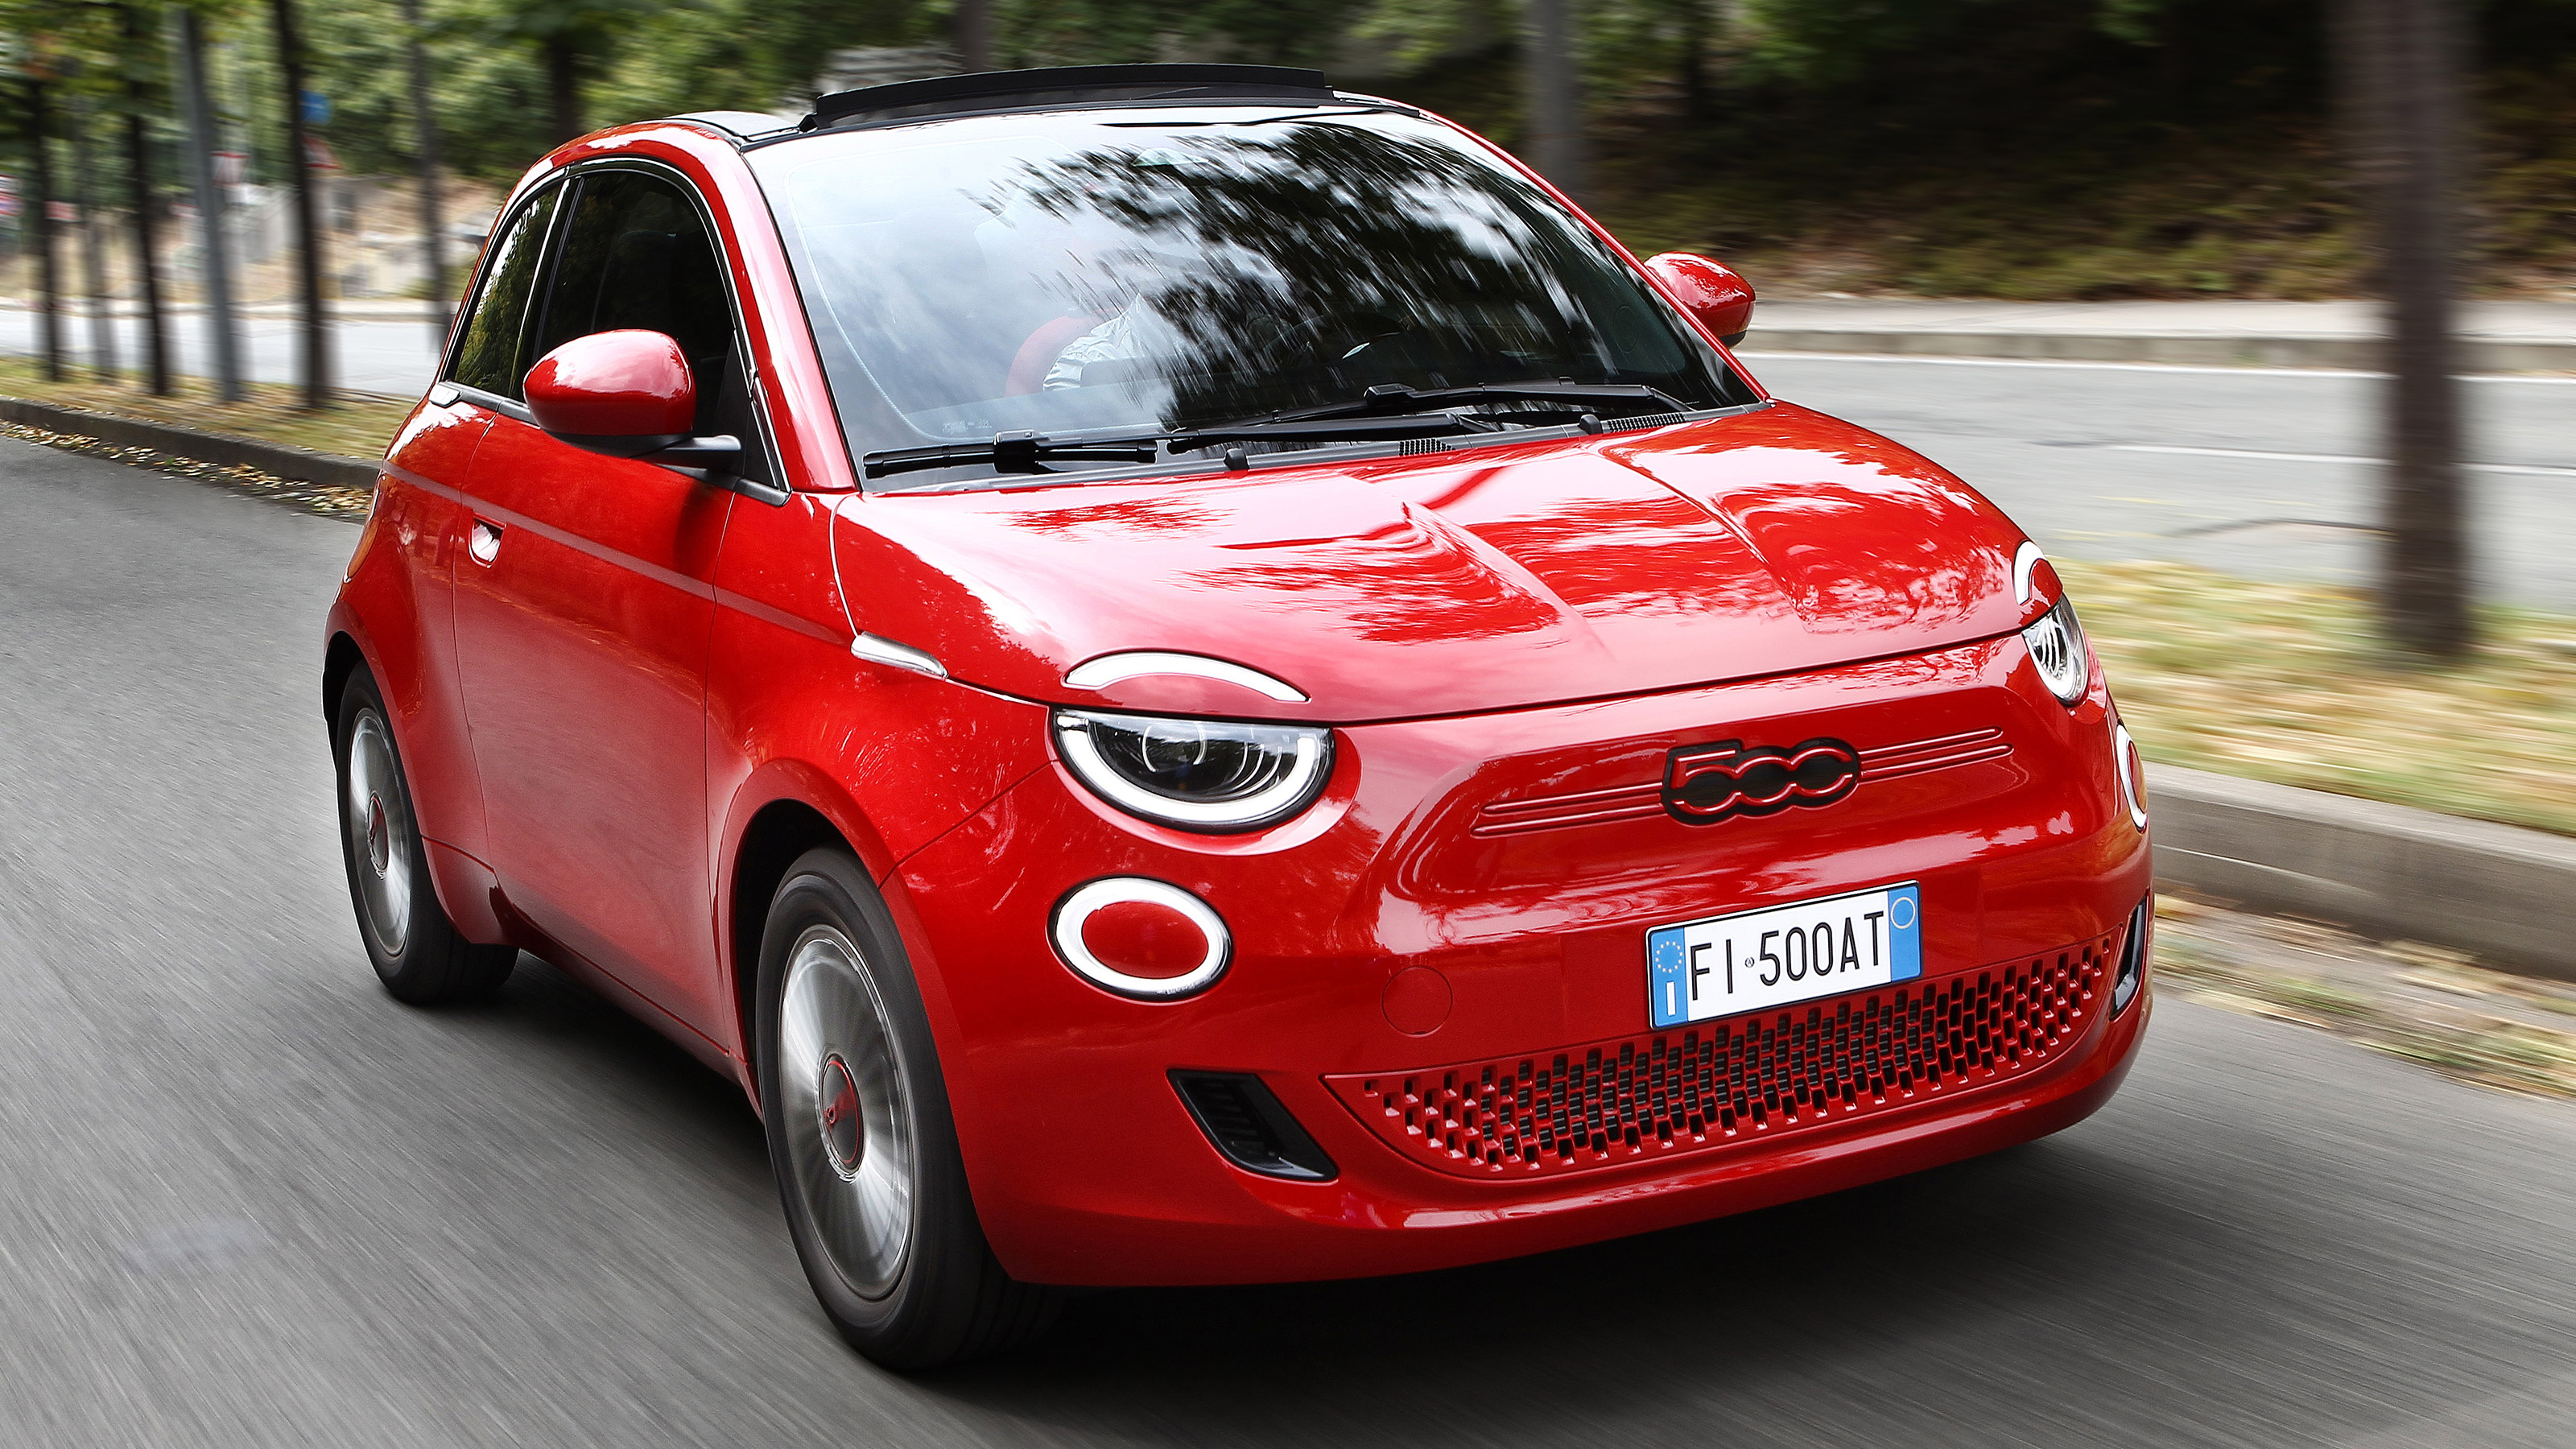 2021 Fiat 500 electric city car: prices, specs and new limited